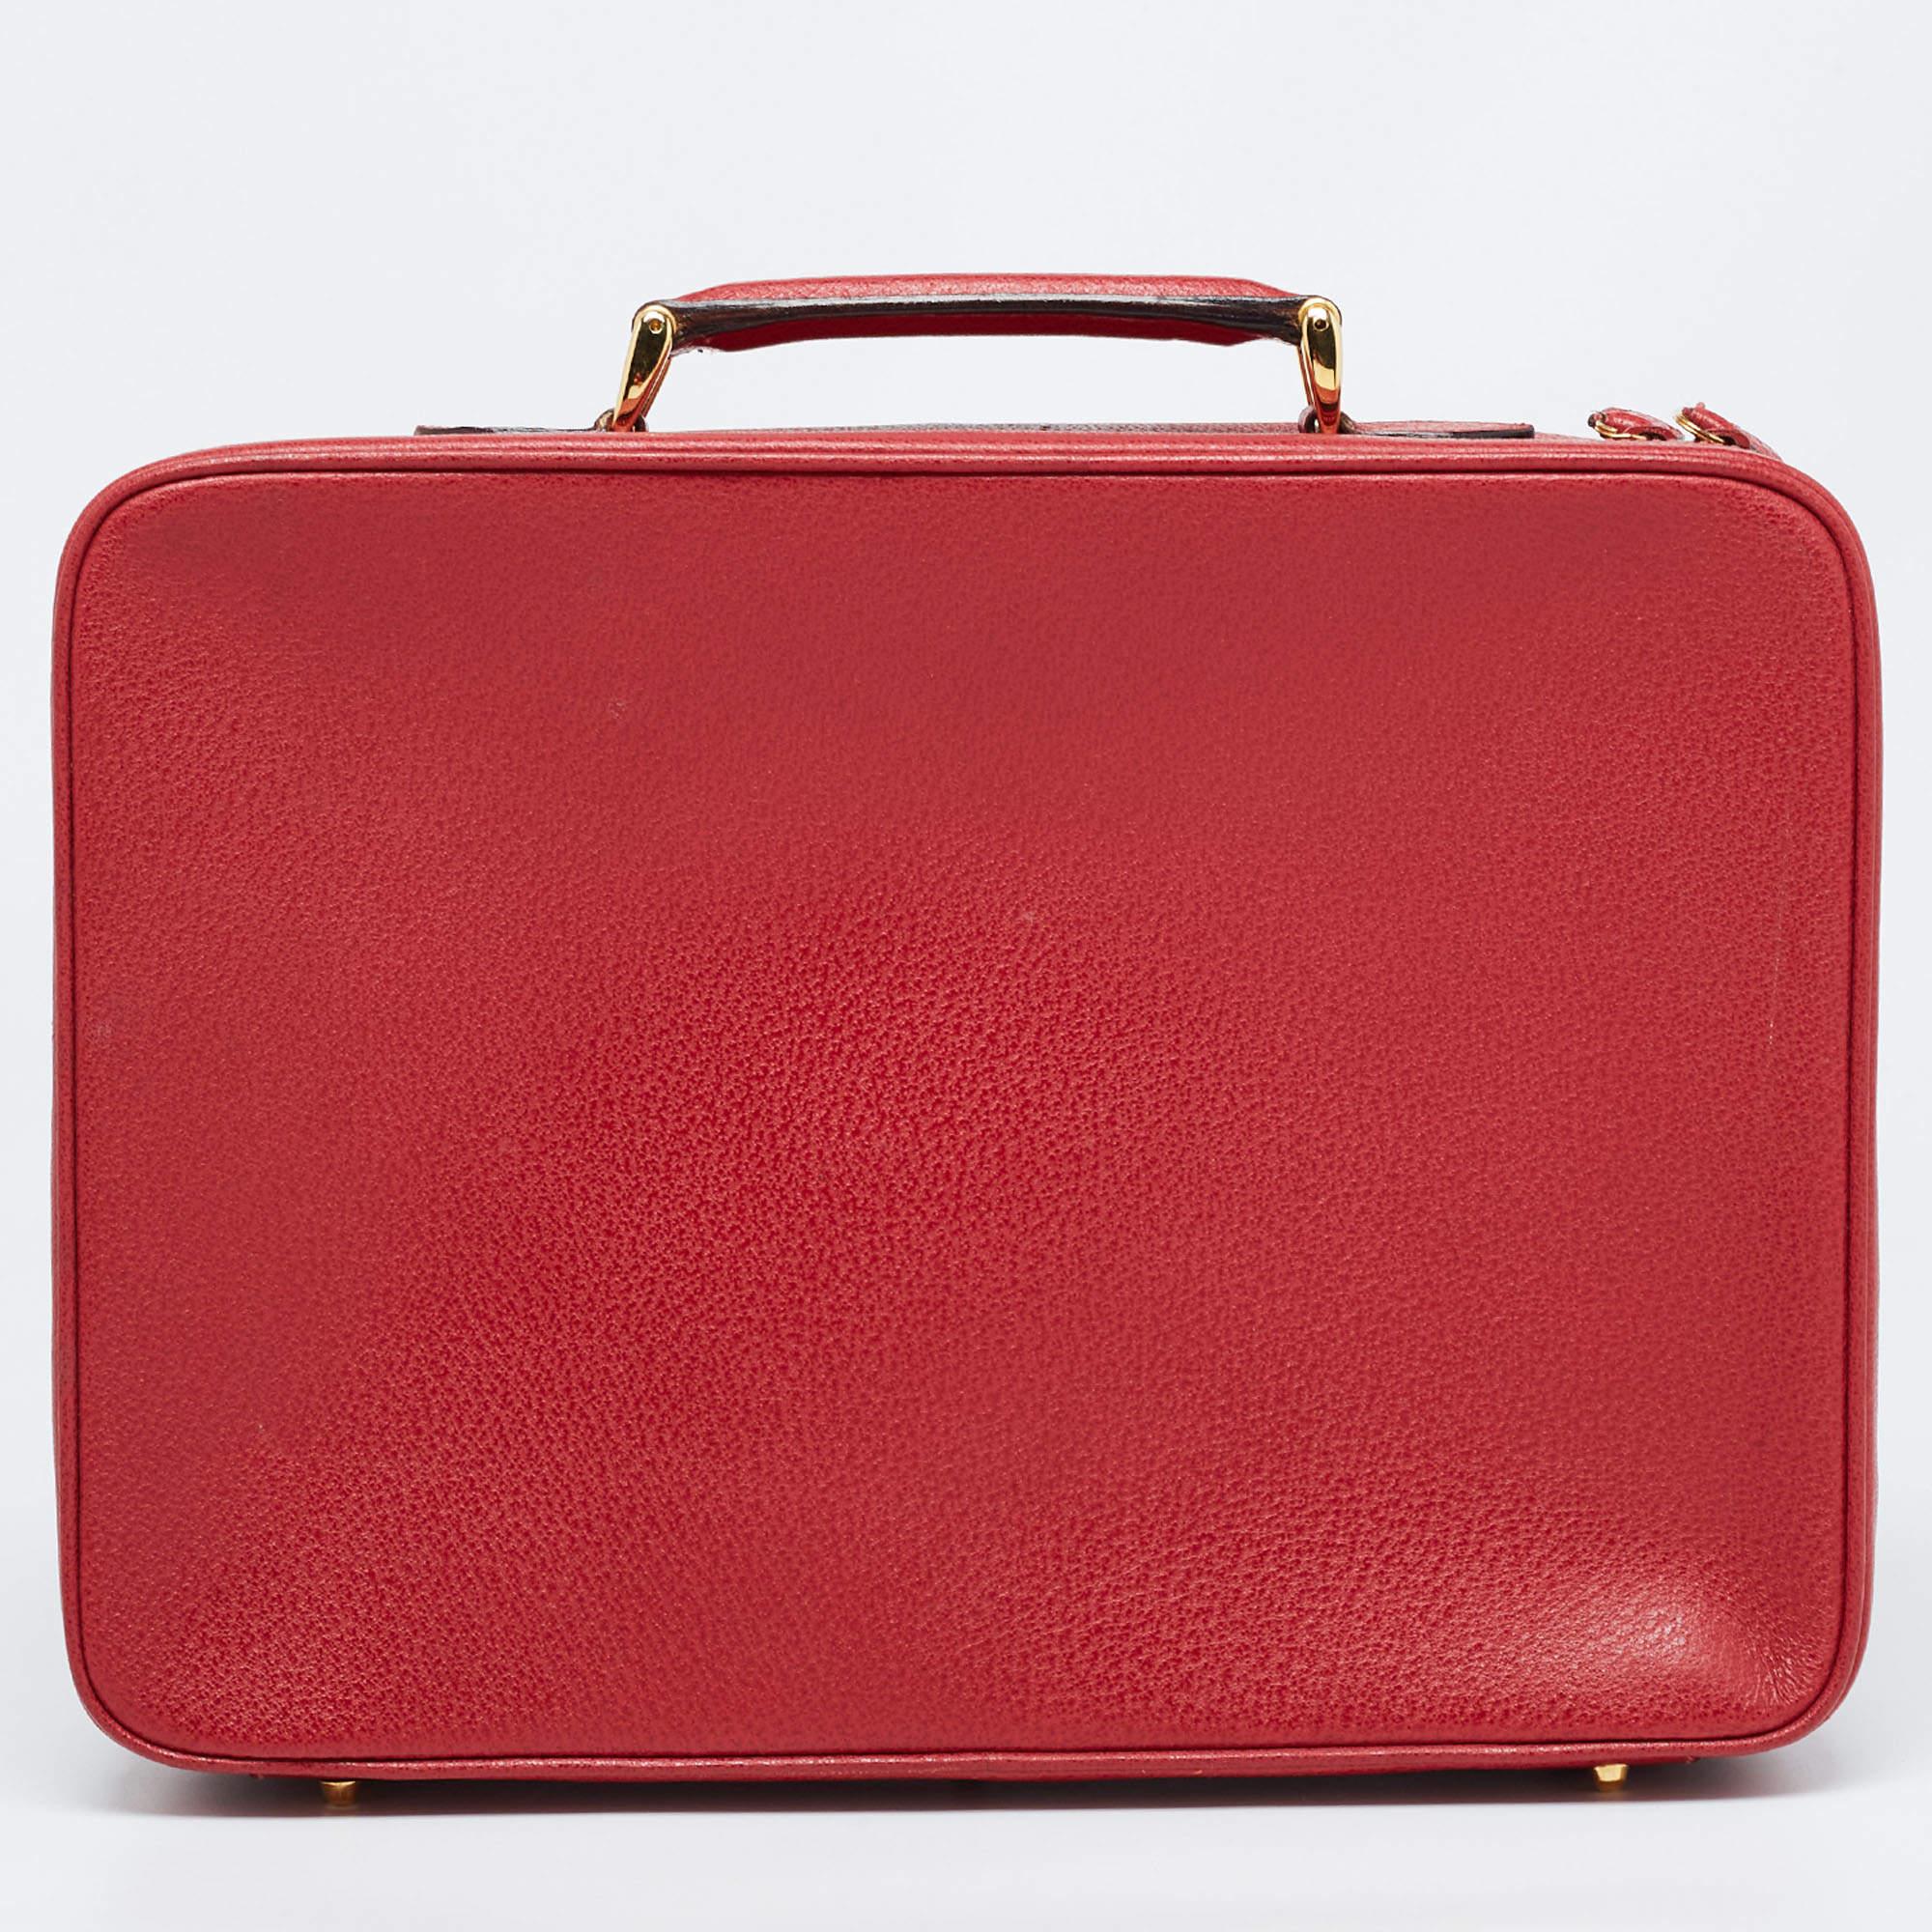 A classic handbag comes with the promise of enduring appeal, boosting your style time and again. This Gucci red briefcase bag is one such creation. It’s a fine purchase.

